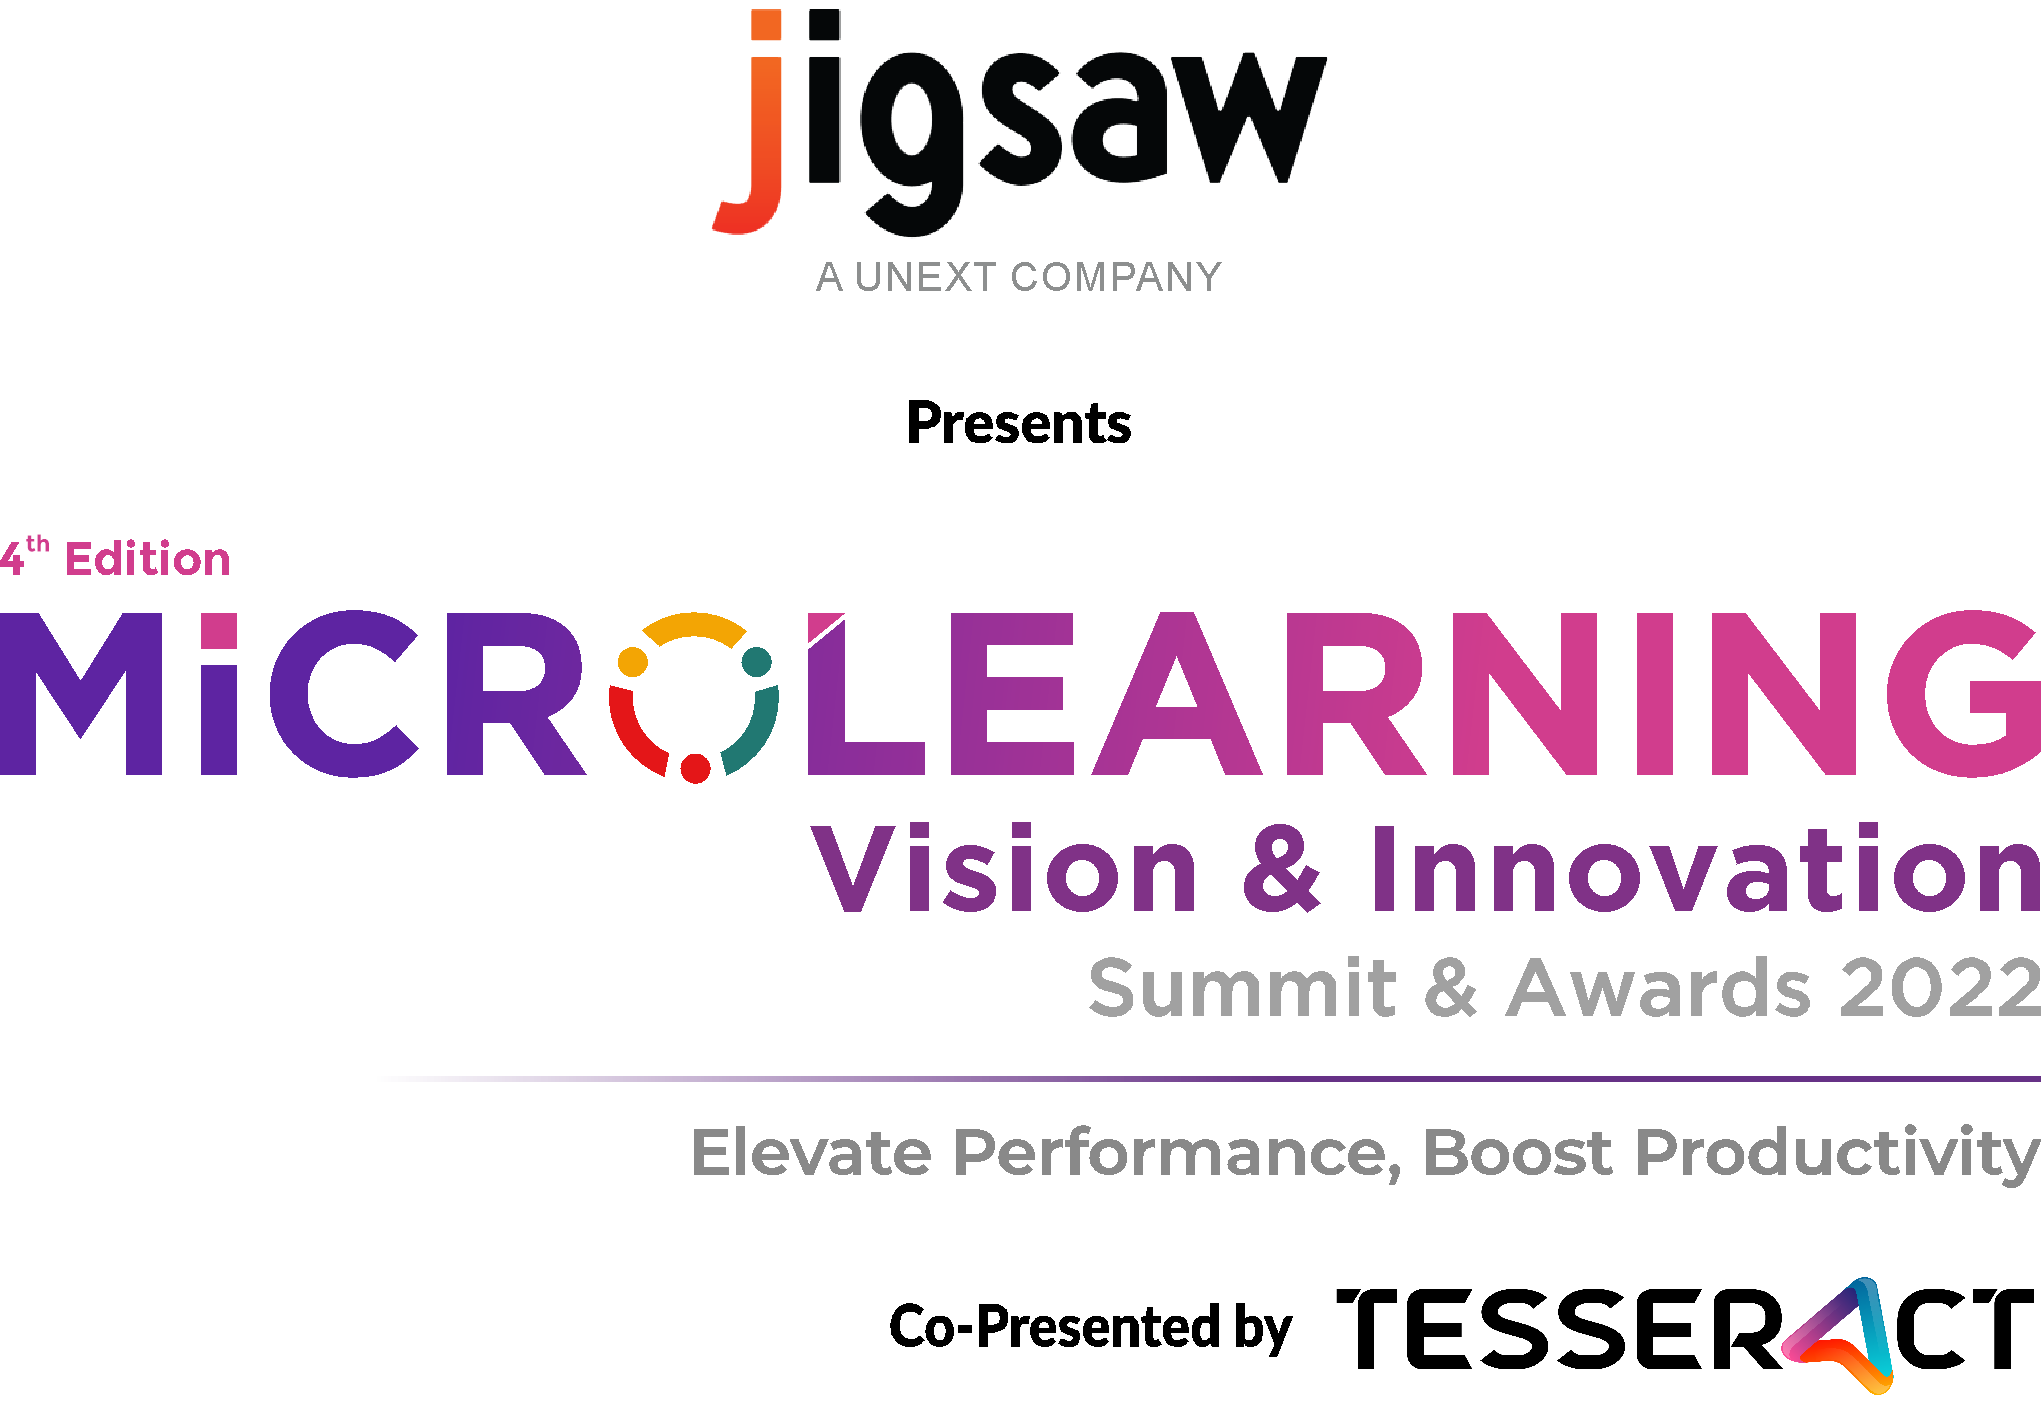 4th Edition Microlearning Vision And Innovation Summit & Awards 2022